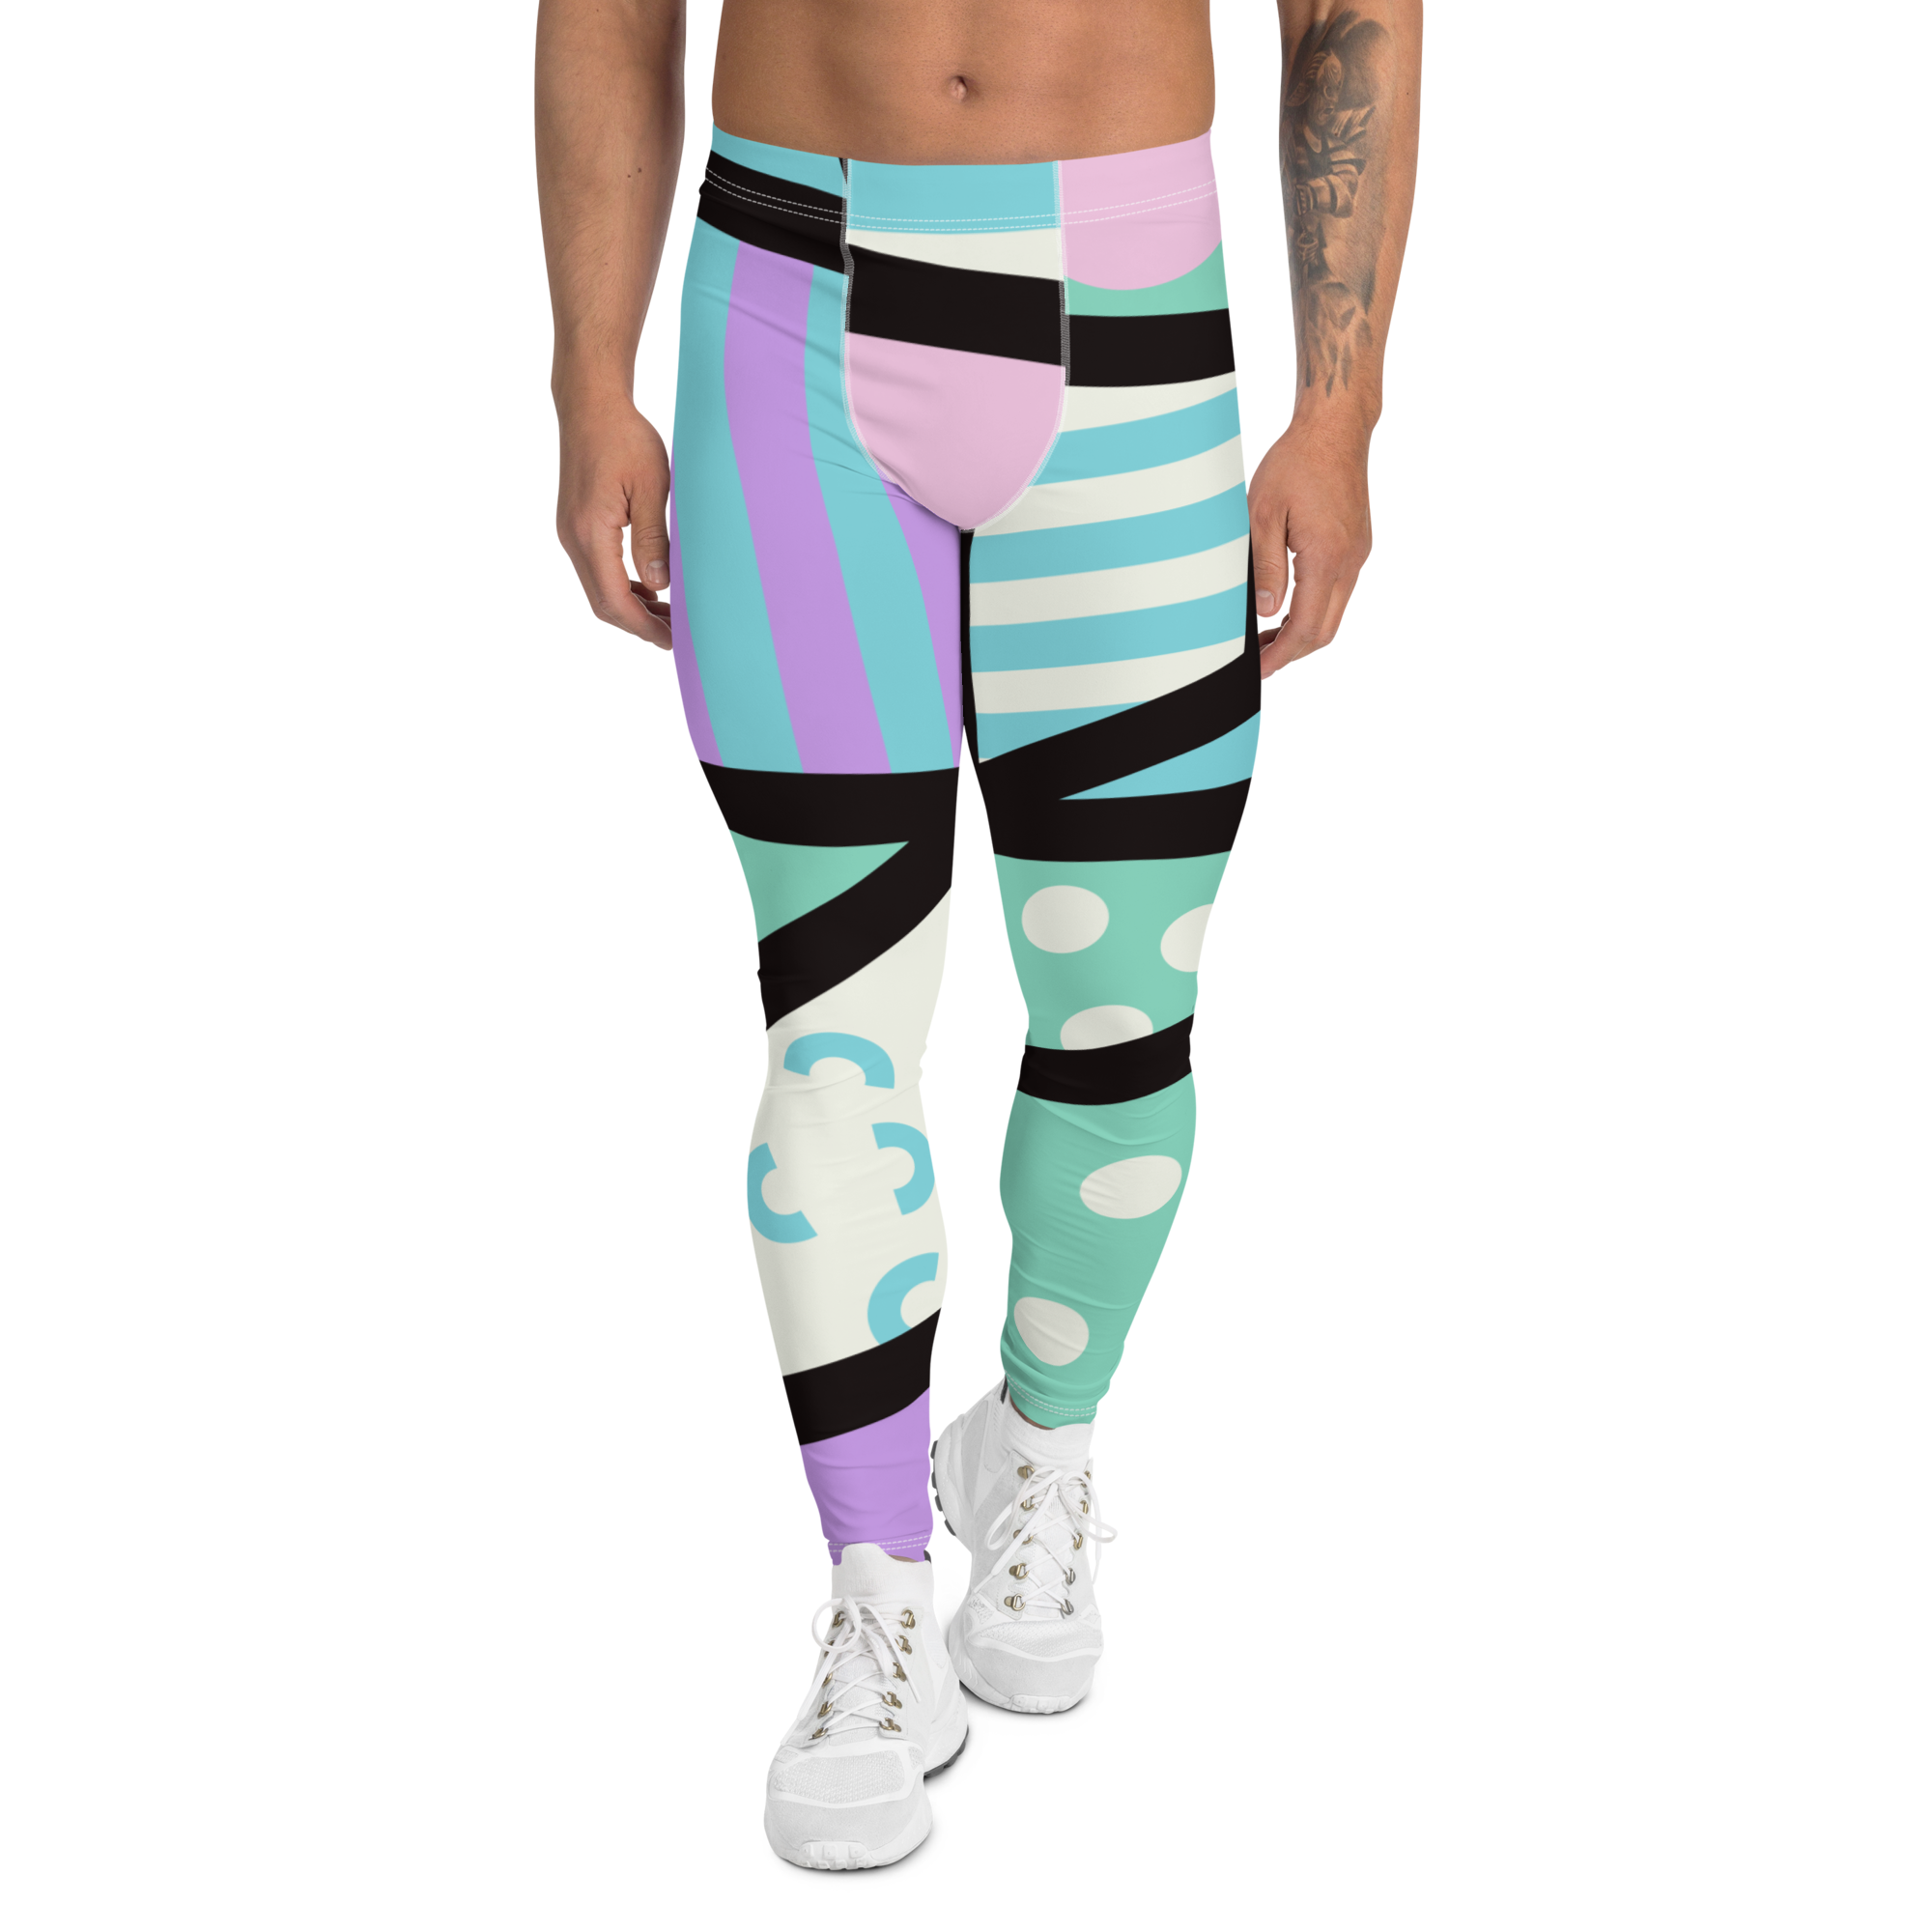 Pastel Kei Yami Kawaii Harajuku fashion meggings or gym leggings for men with pastel blue, pink, cream, purple and green with a black overlay on these Pastel Goth gym leggings and festival pants by BillingtonPix